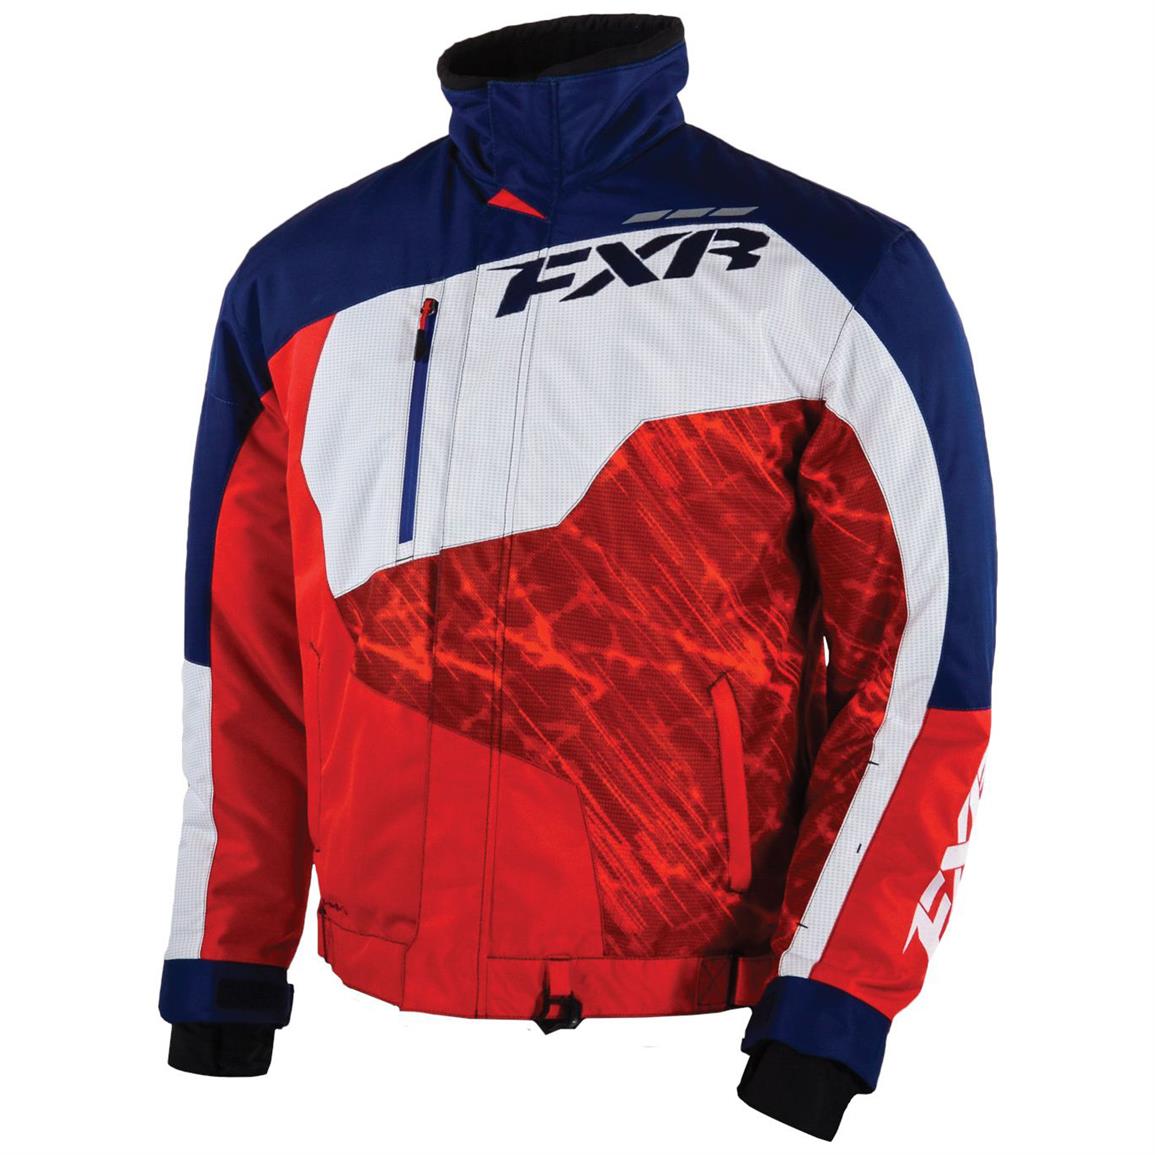 FXR Turbo Jacket - 627799, Snowmobile Clothing at Sportsman's Guide